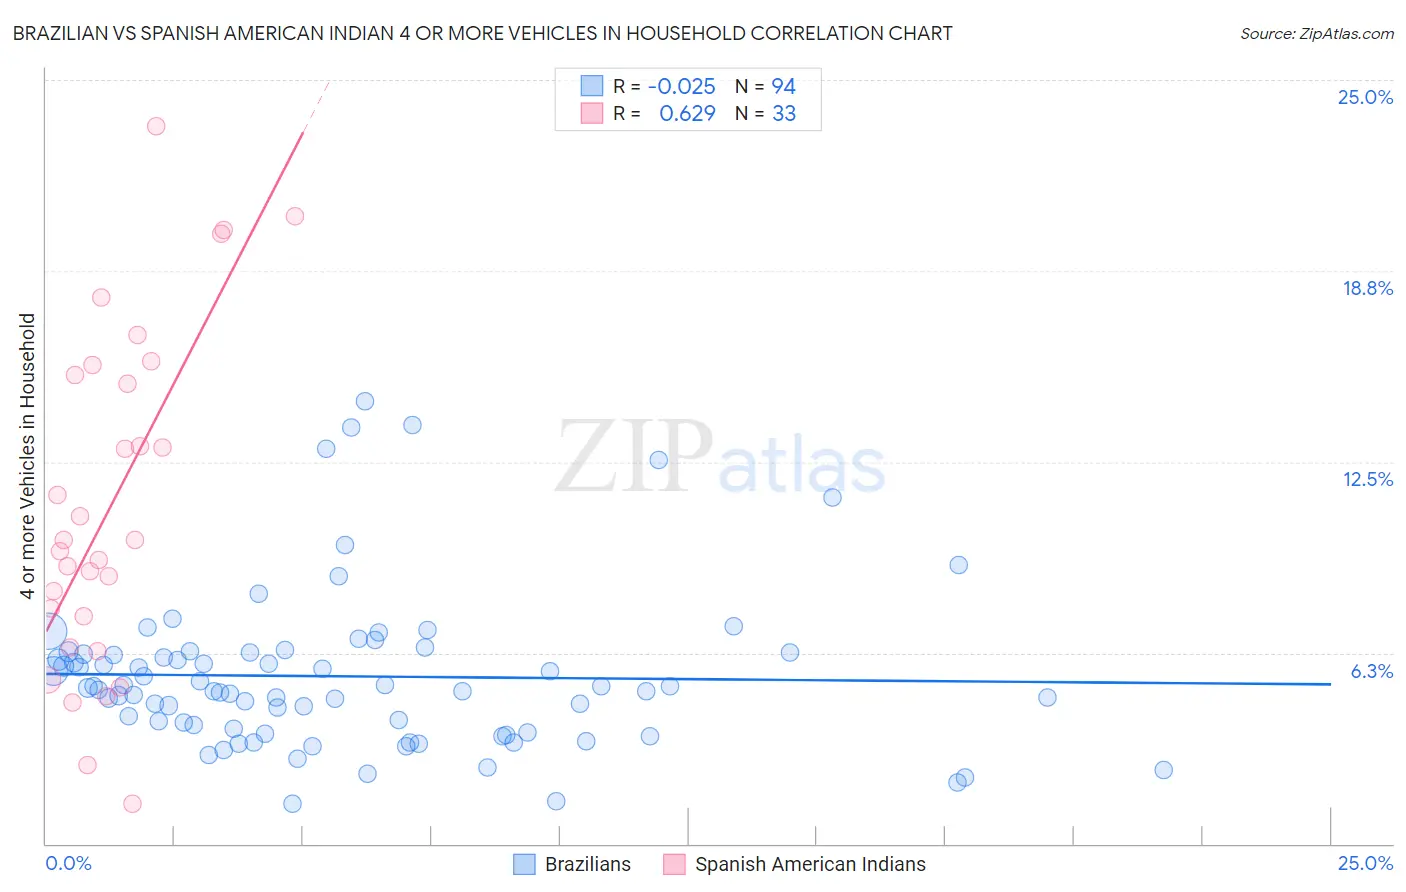 Brazilian vs Spanish American Indian 4 or more Vehicles in Household